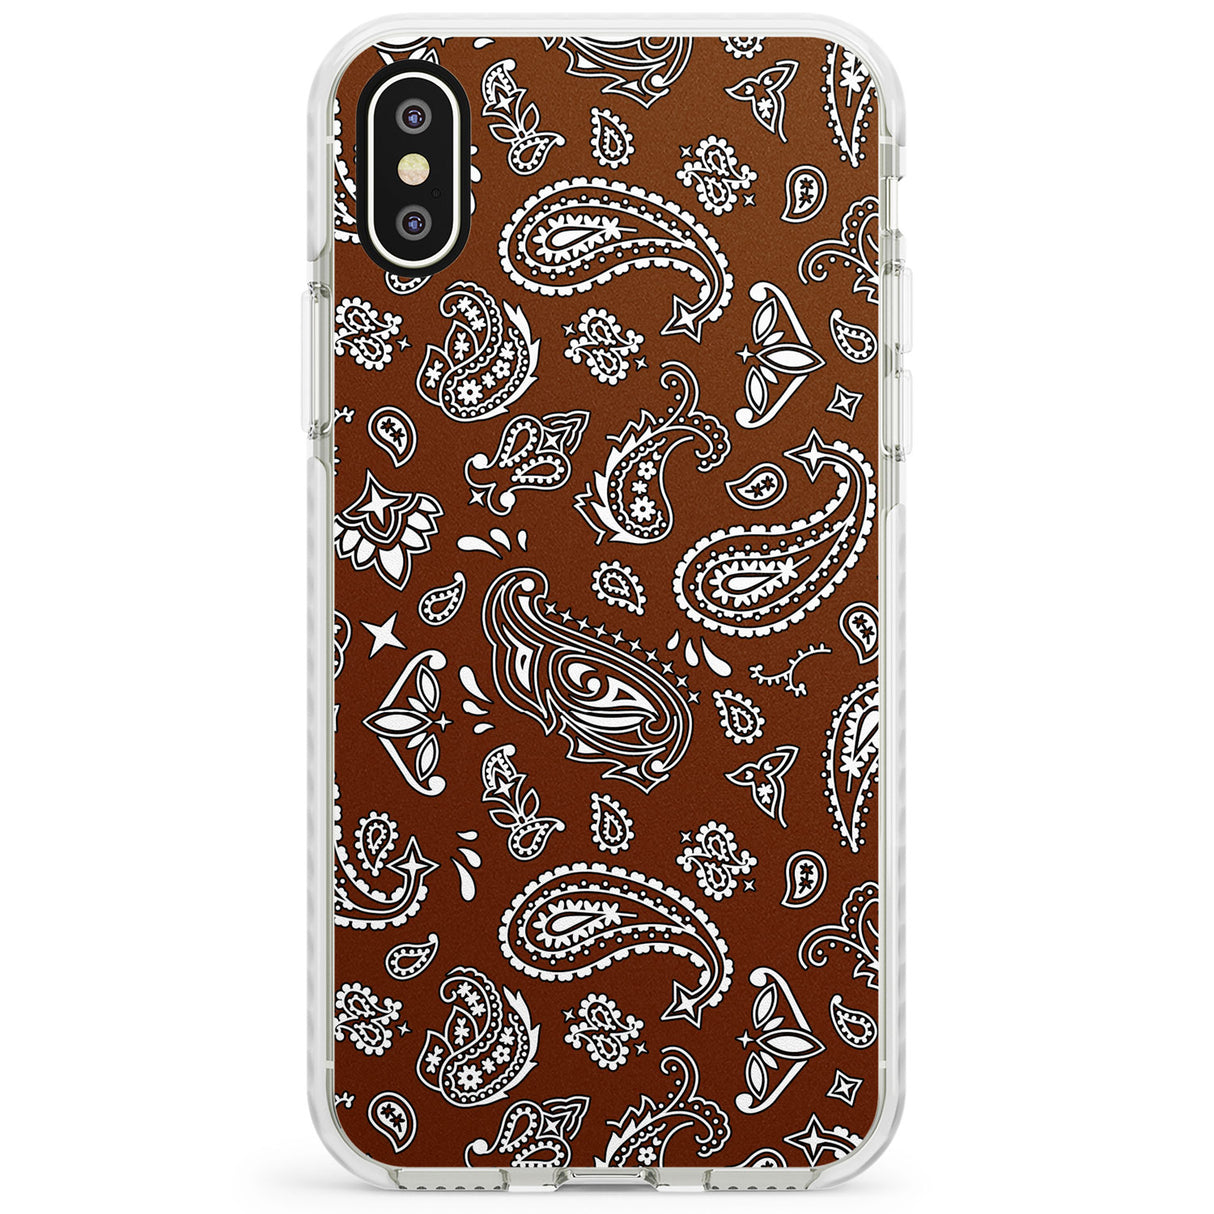 Brown Bandana Impact Phone Case for iPhone X XS Max XR